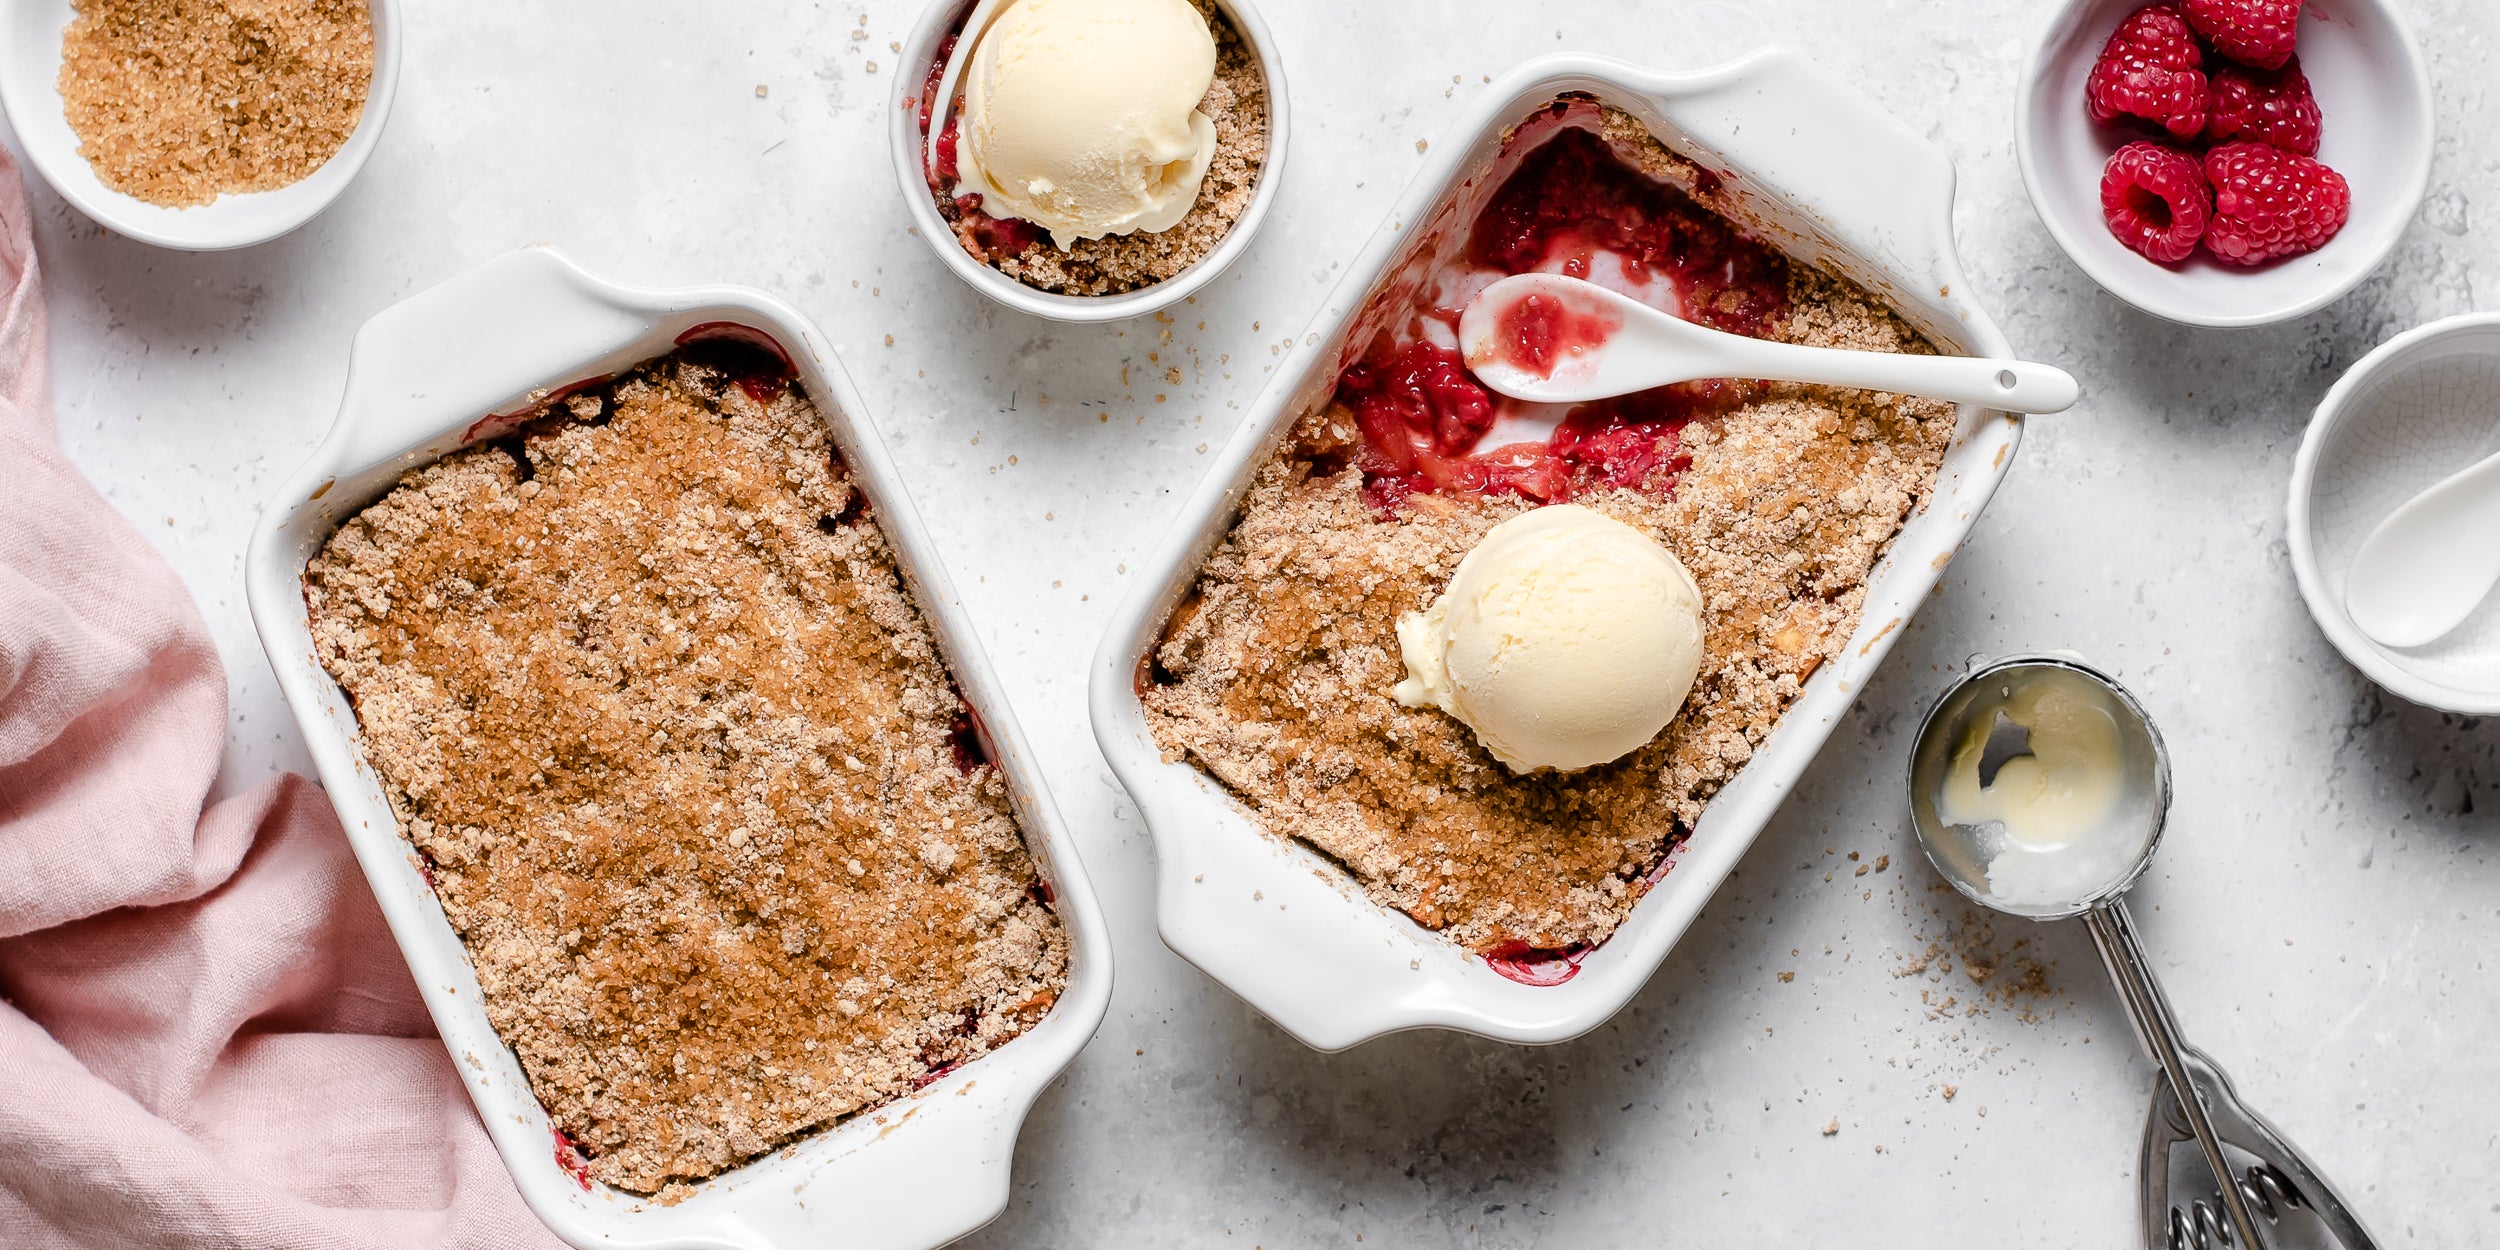 Top view of a golden topped Apple & Raspberry Crumble with a spoon dipping in for a portion, topped with a dollop of vanilla icecream